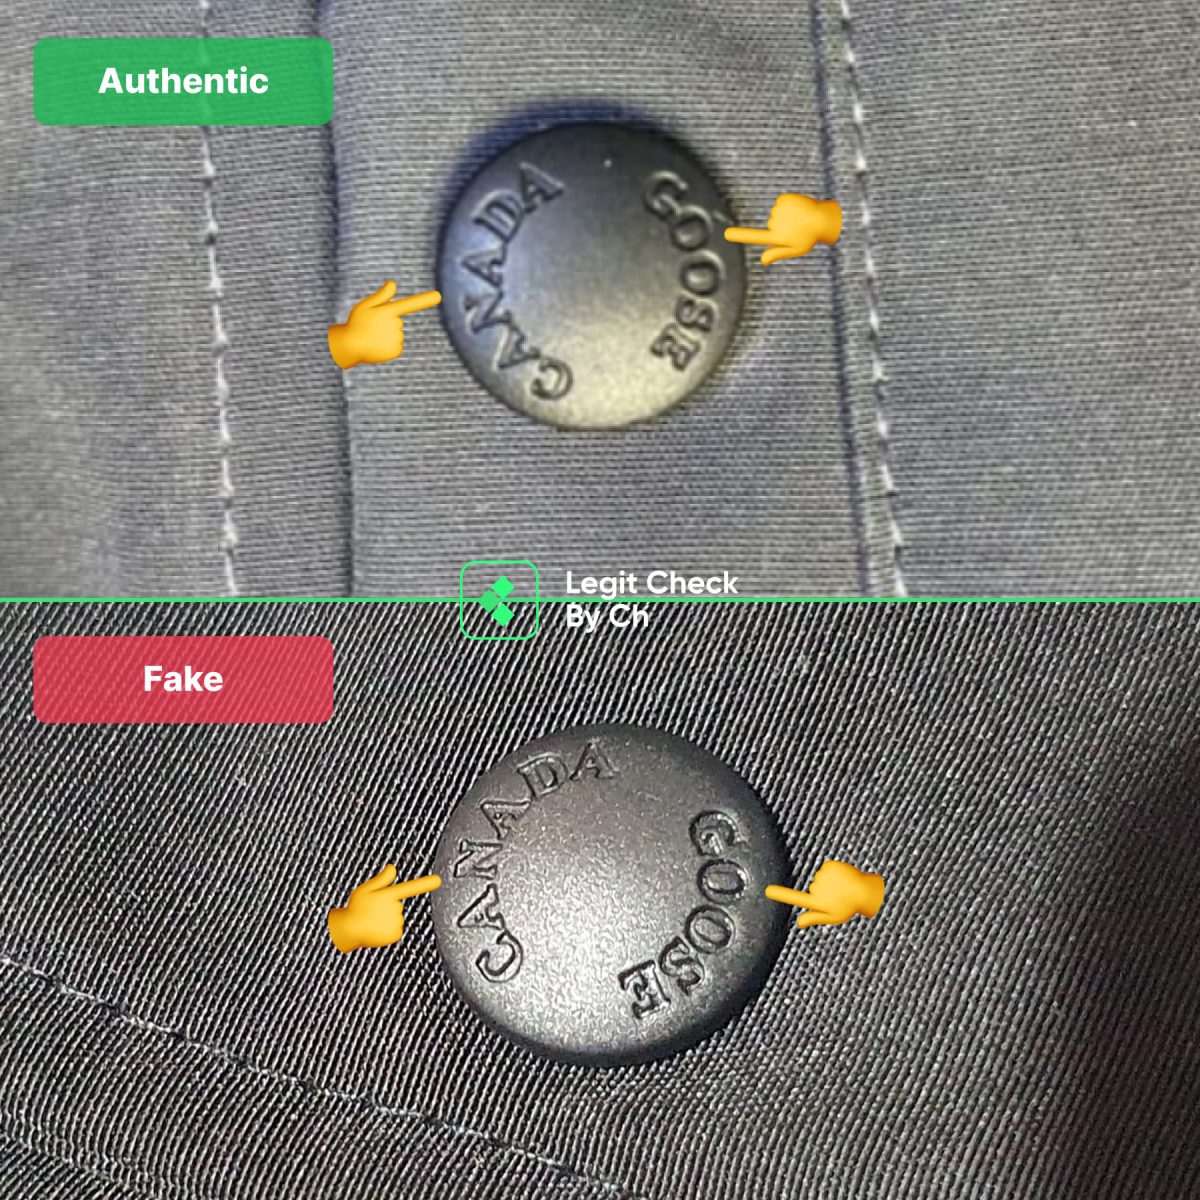 Buttons comparison of the real vs fake Canada Goose Jackets